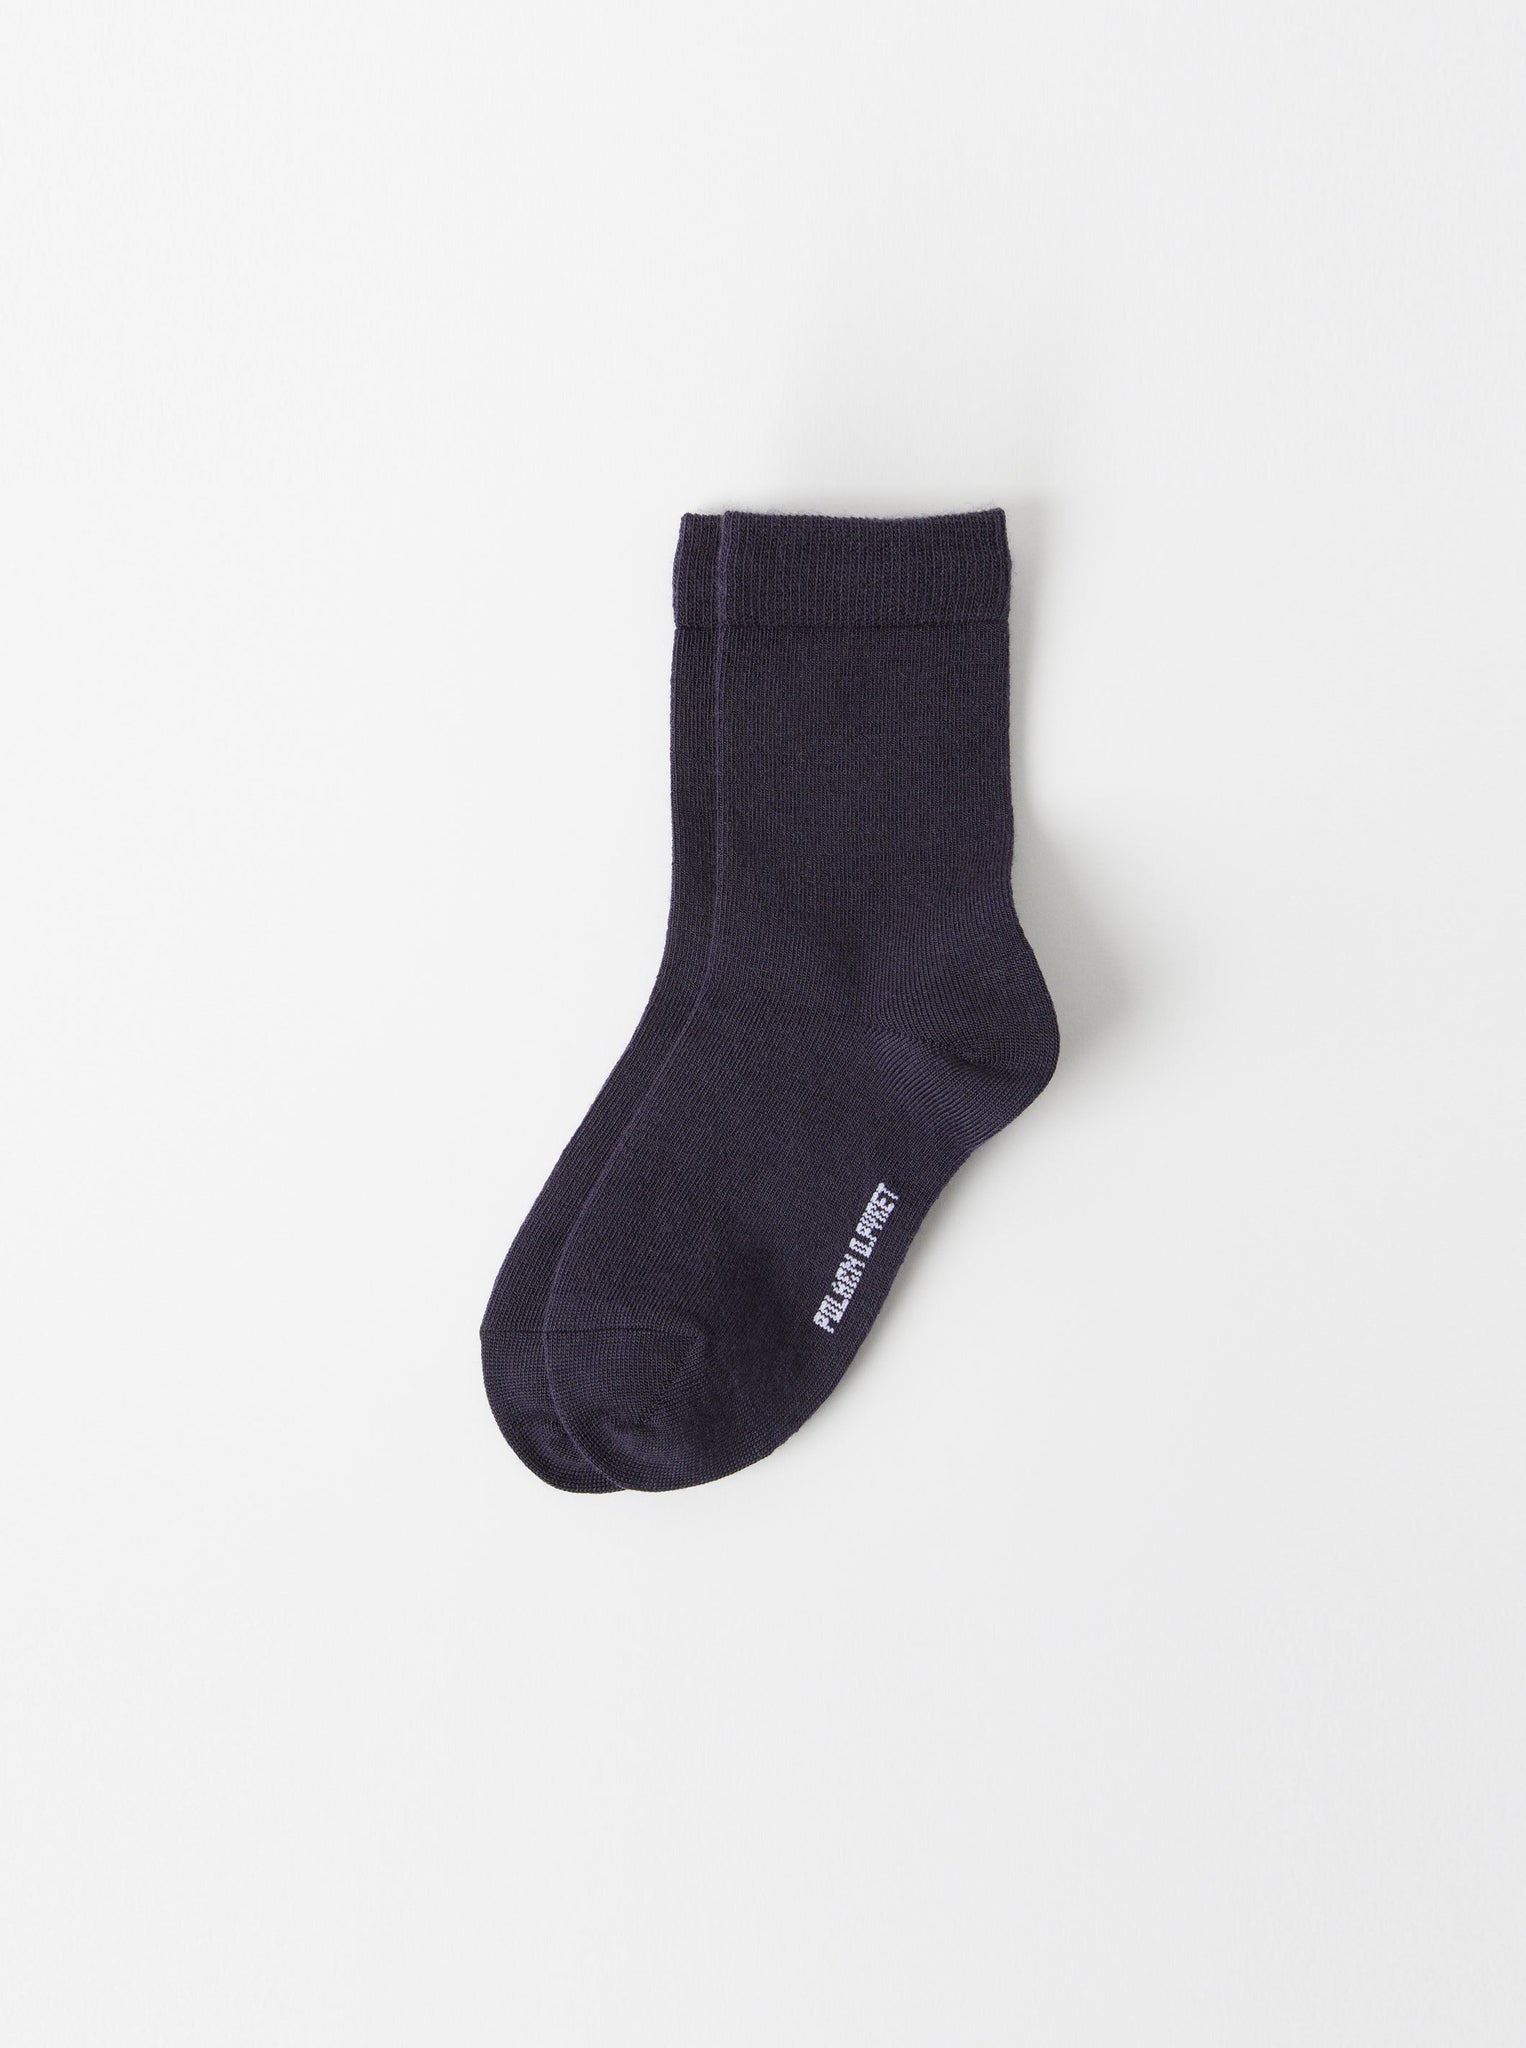 Navy Merino Kids Socks from the Polarn O. Pyret kidswear collection. Quality kids clothing made to last.